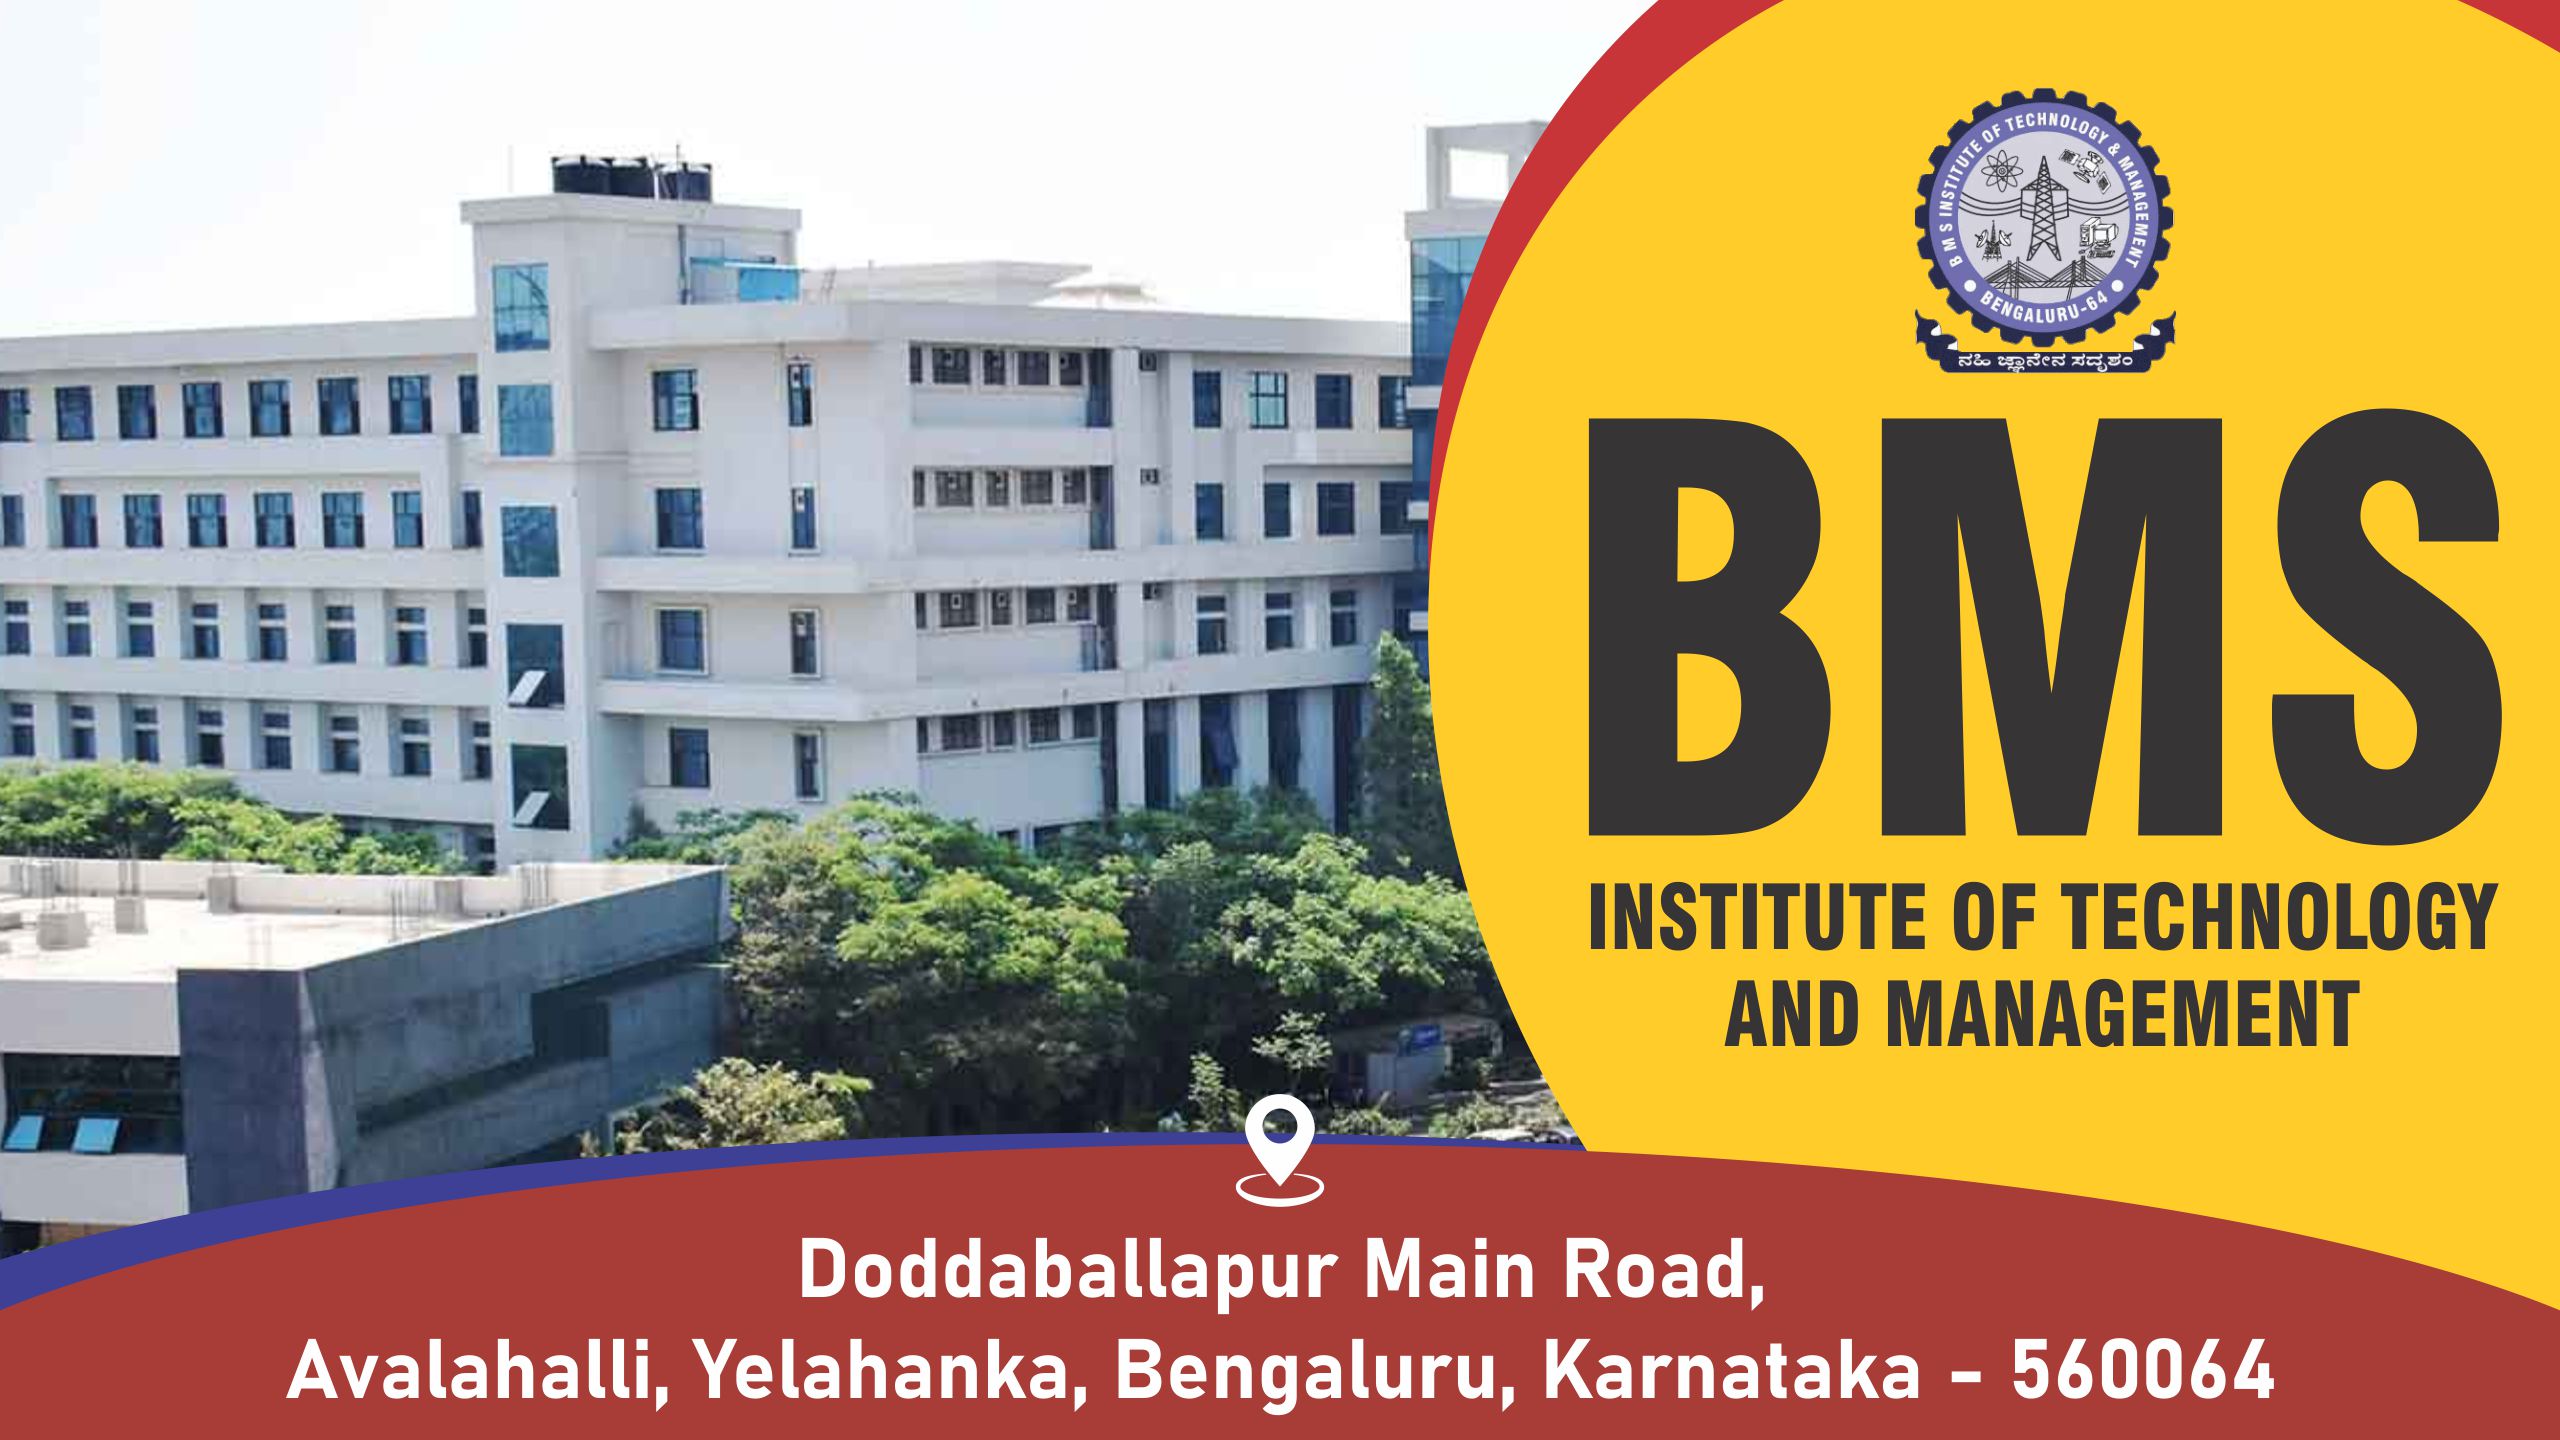 Out Side View of BMS Institute of Technology and Management